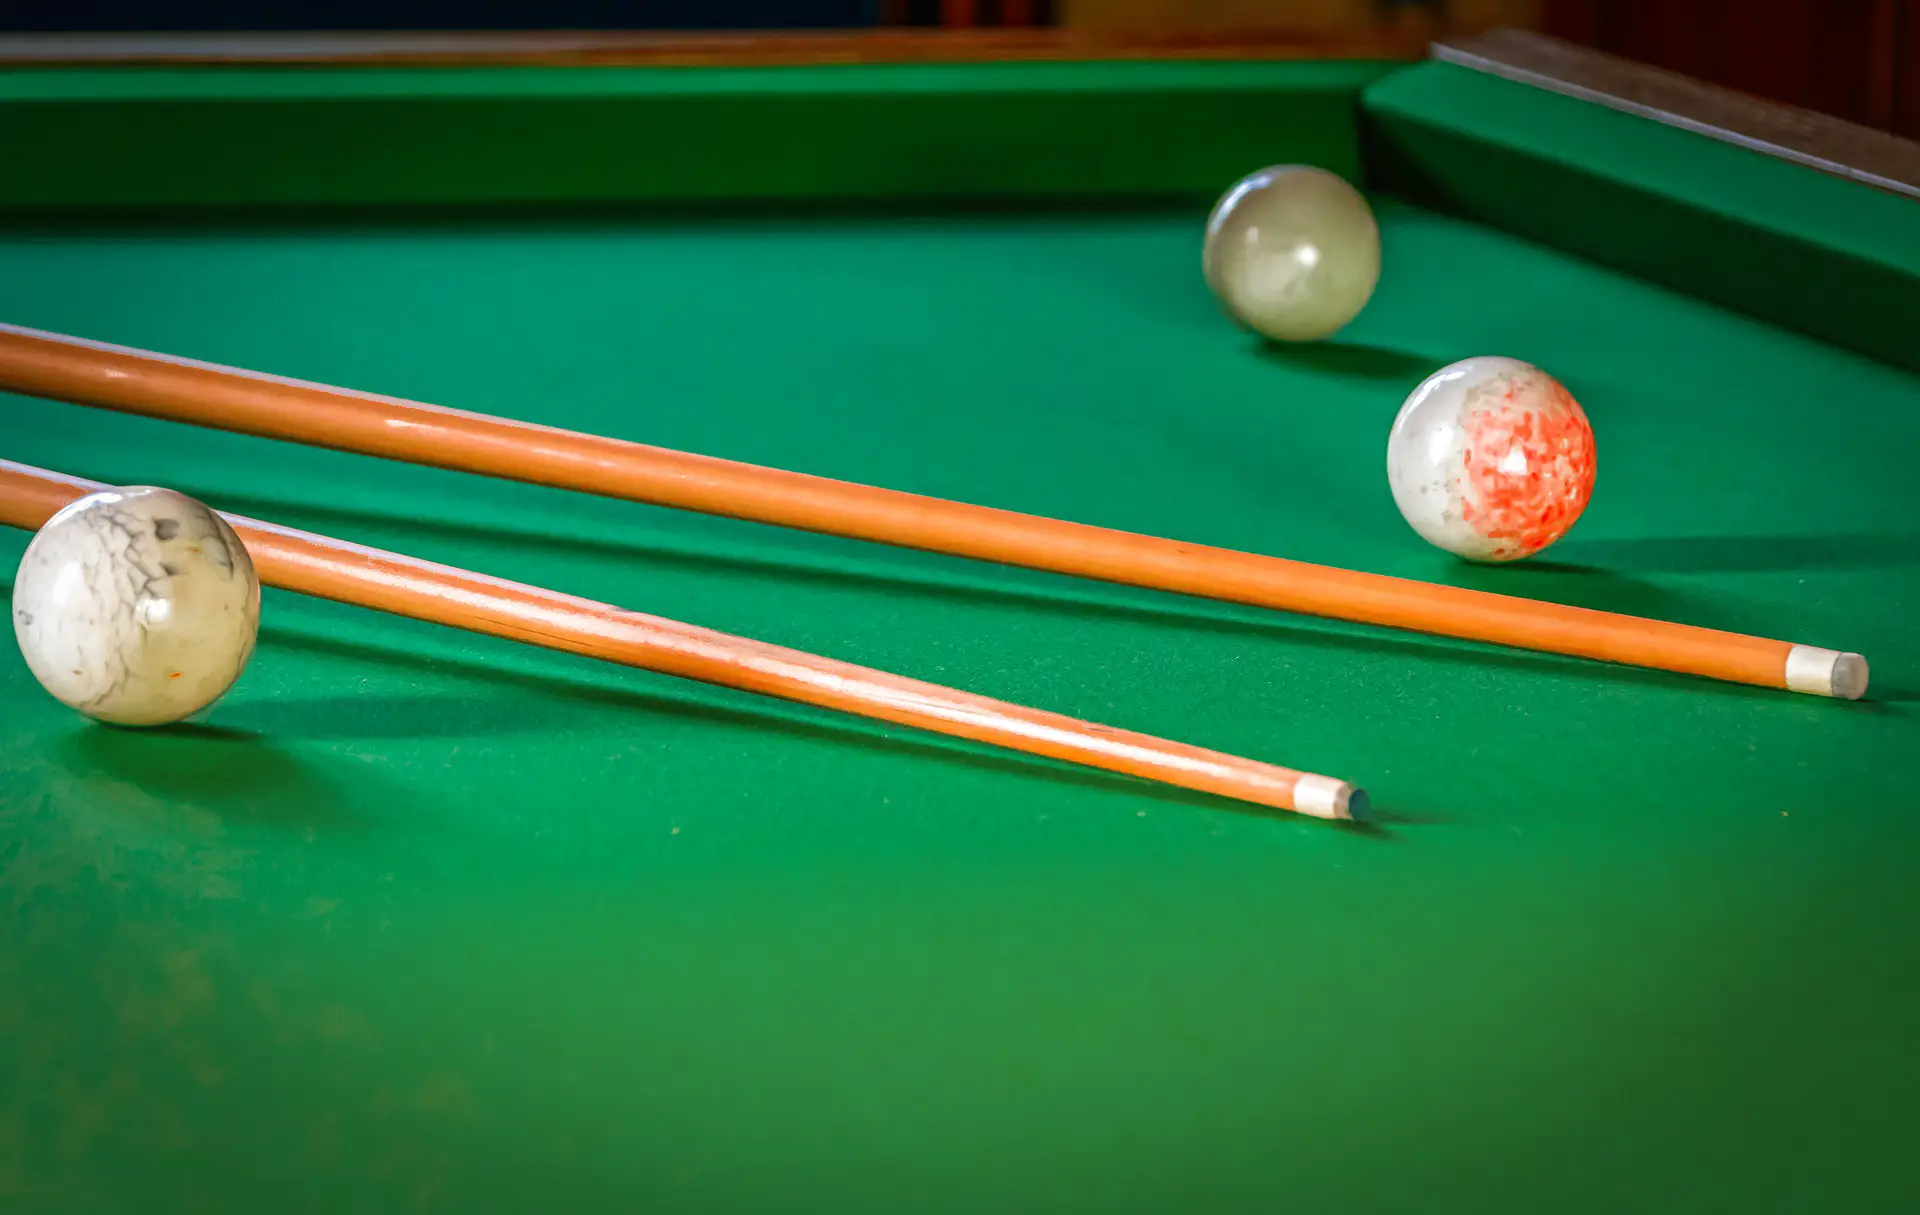 Here’s How To Play 3 Cushion Billiards